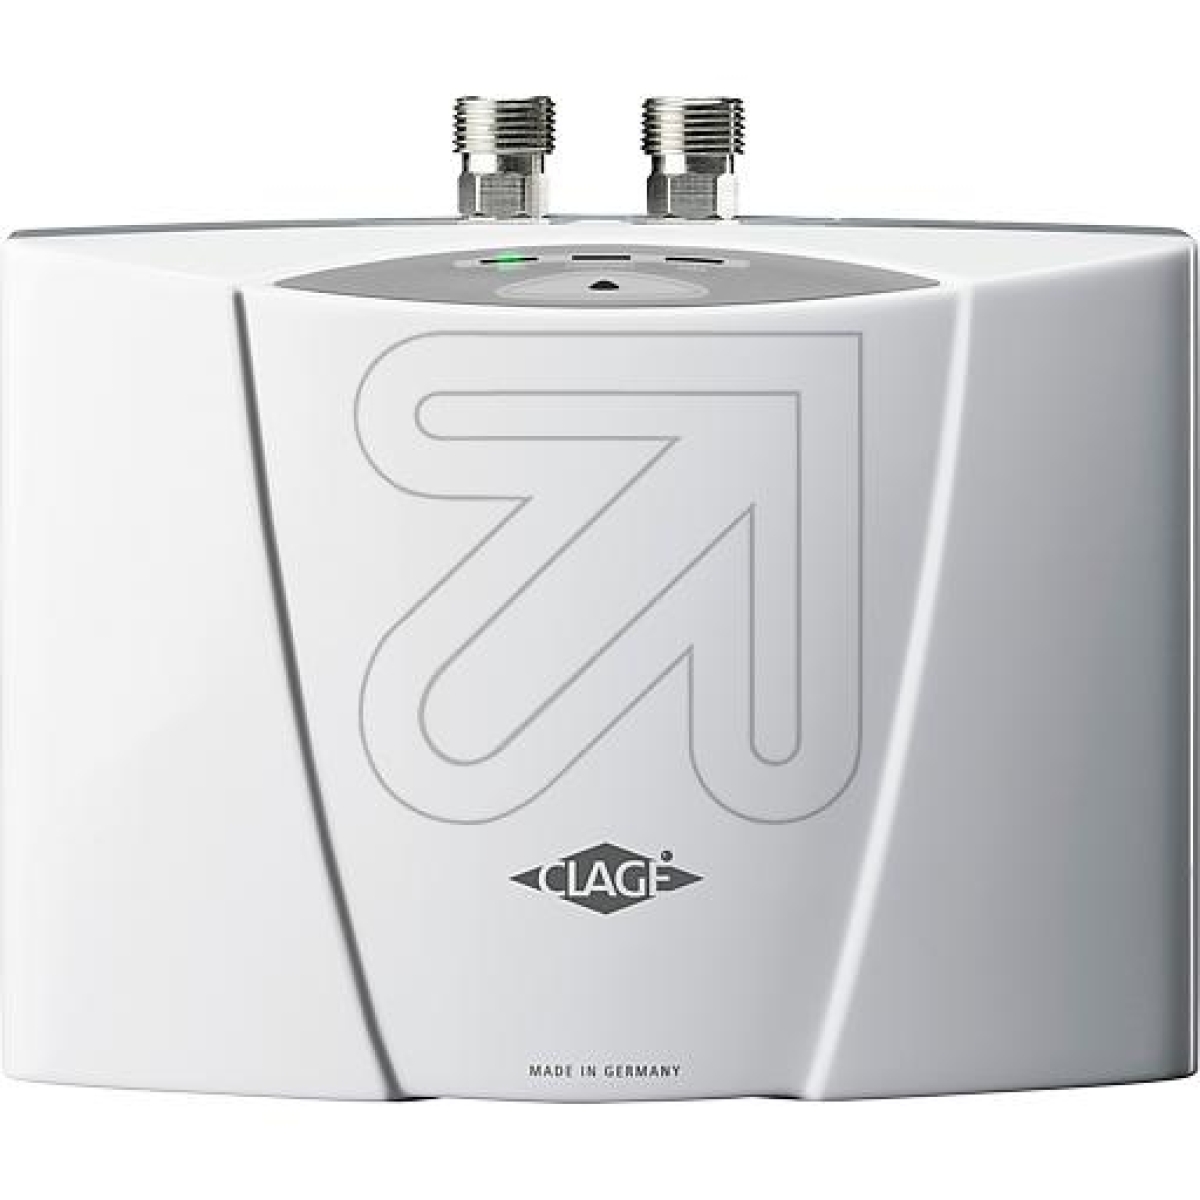 ClageSmall instantaneous water heater MCX 3